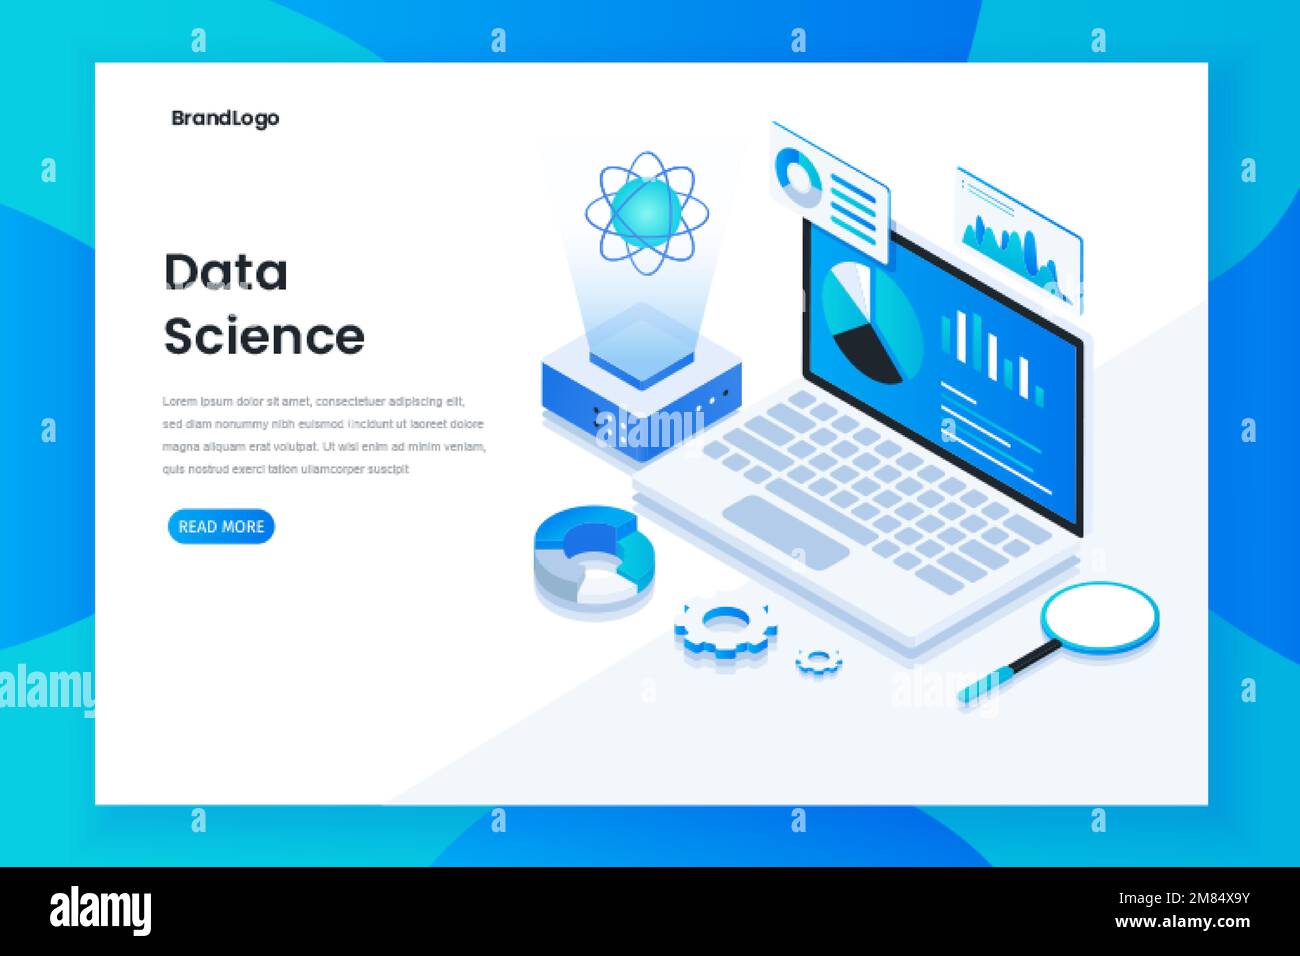 Modern flat design isometric concept of data science. Illustration for websites, landing pages, mobile applications, posters and banners Stock Vector